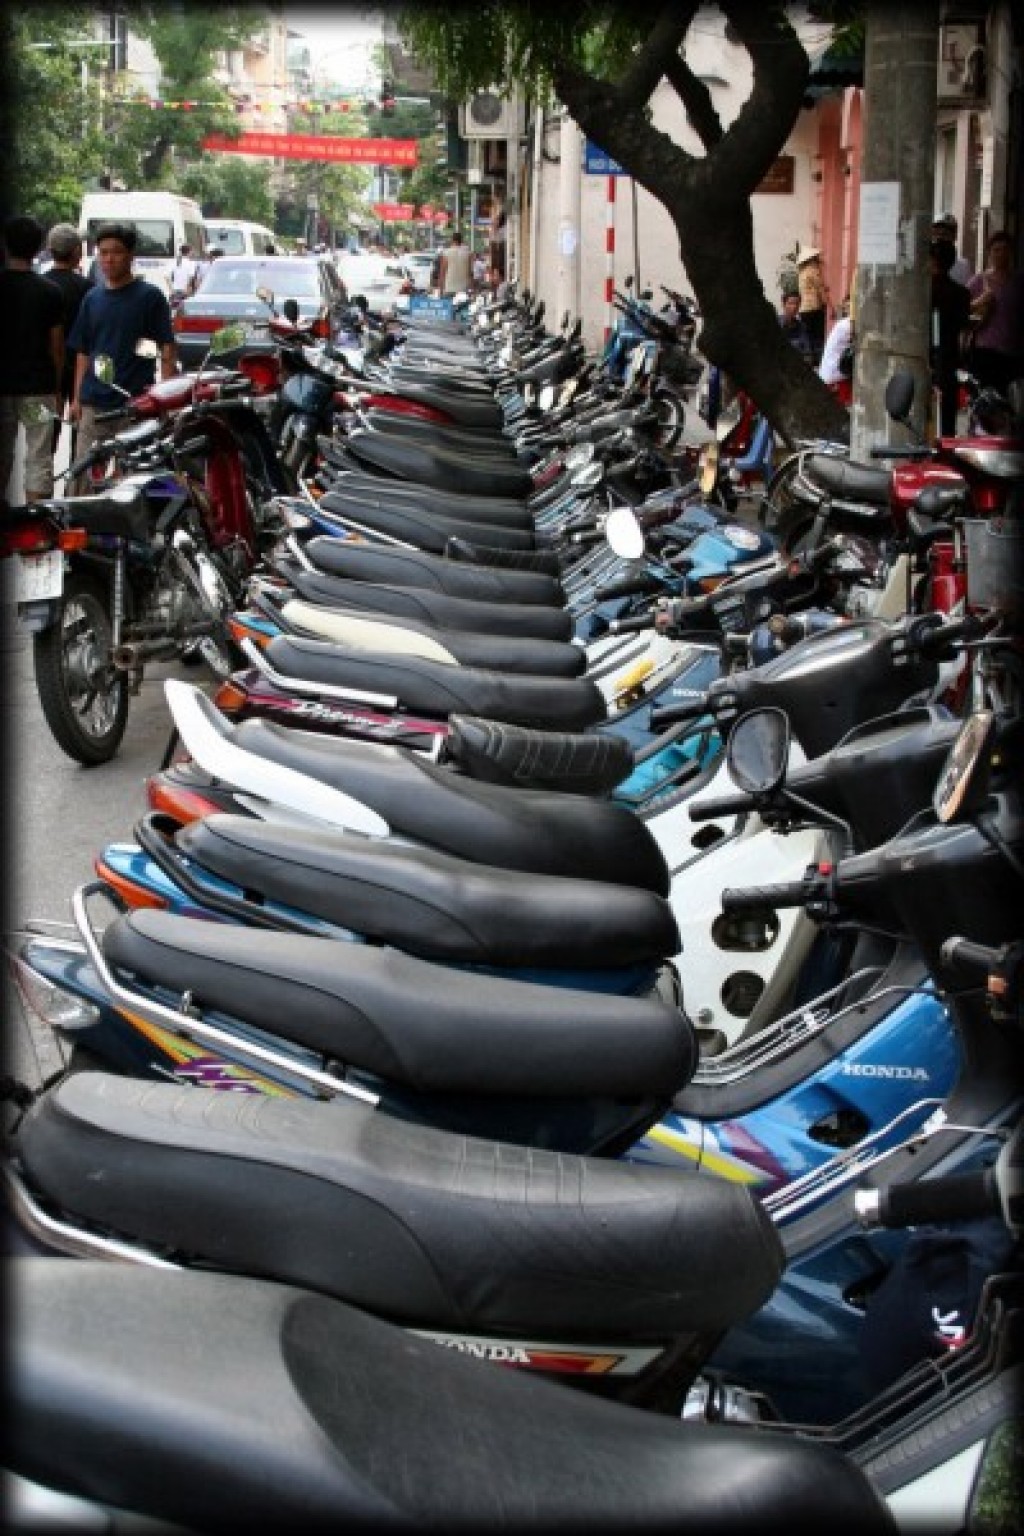 Our biggest complaint about Hanoi (and Saigon) was that the cities were completely overrun by motorcycles.  The roads are complete chaos, and crossing them was a major event.